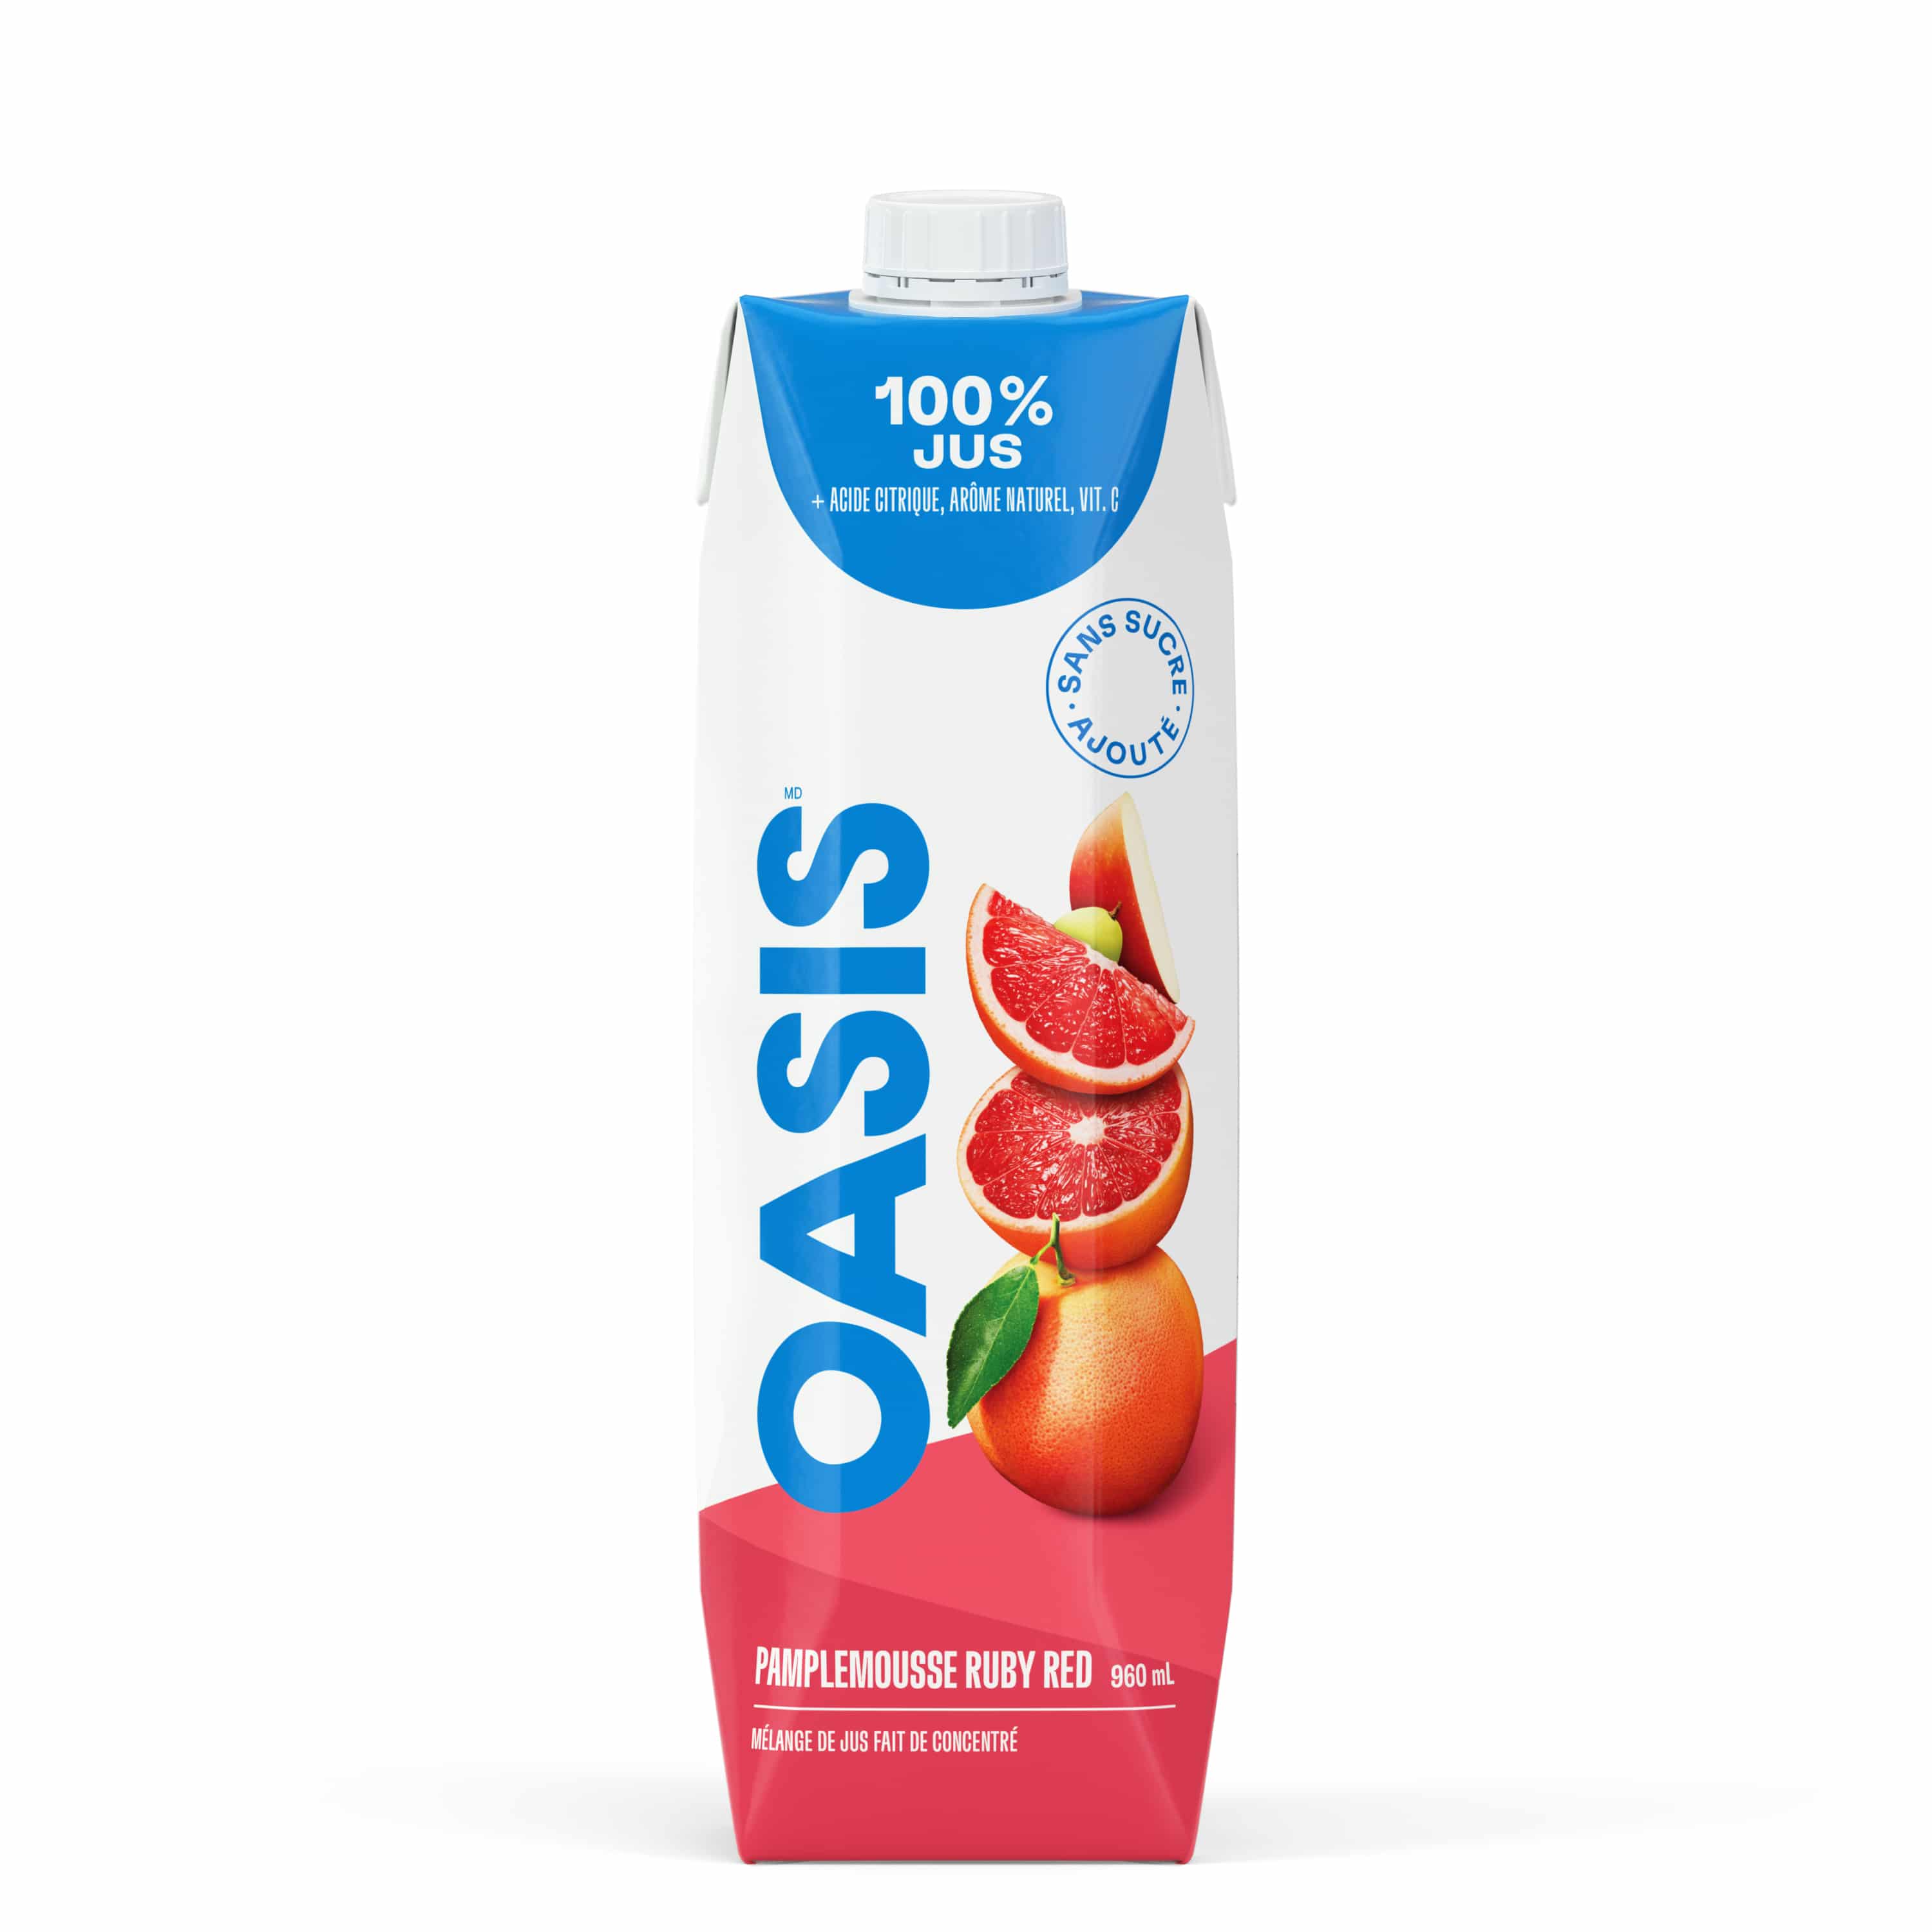 OASIS PAMPLEMOUSSE RUBY RED Prisma Tetra 960mL